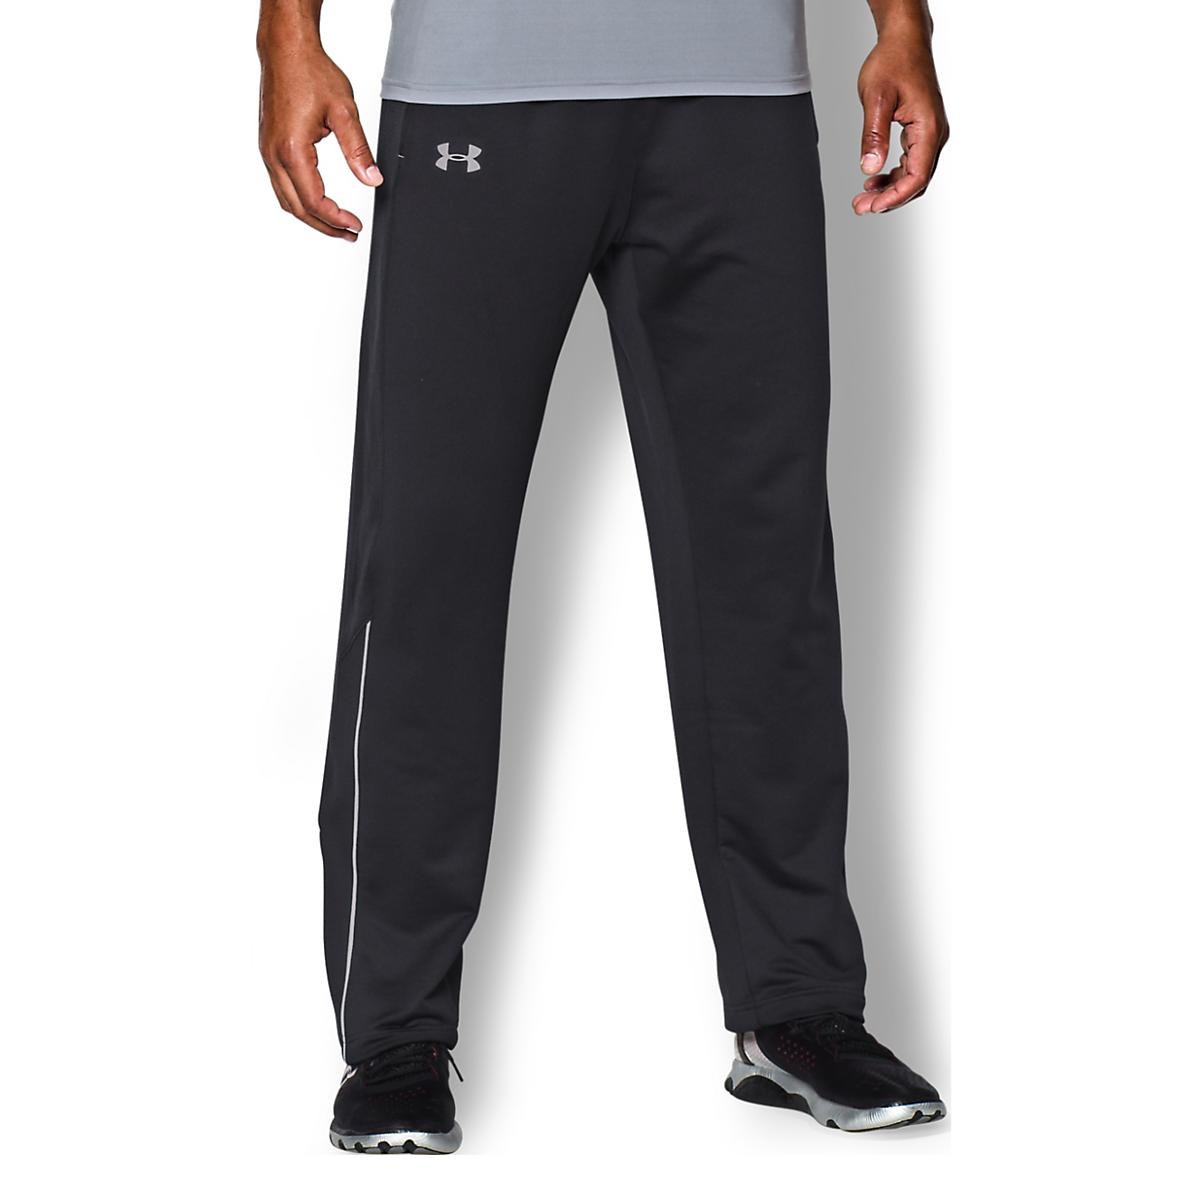 Mens Under Armour Coldgear Infrared Run Pant Full Length Tights at Road ...